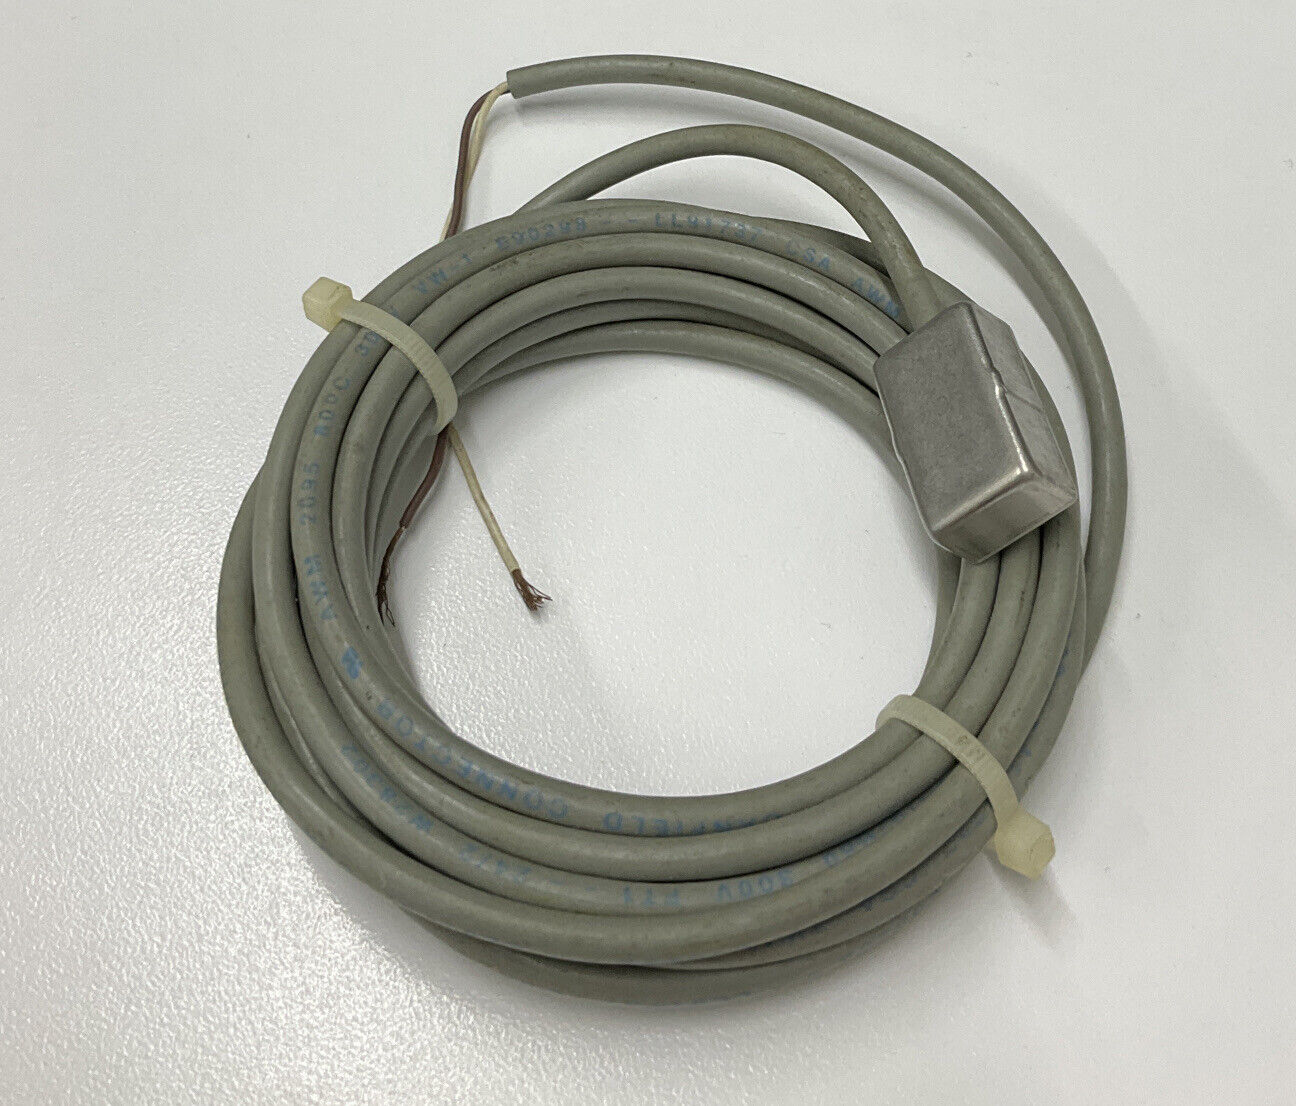 Canfield Connector 810-000-004 Reed Switch 120V (CL240)